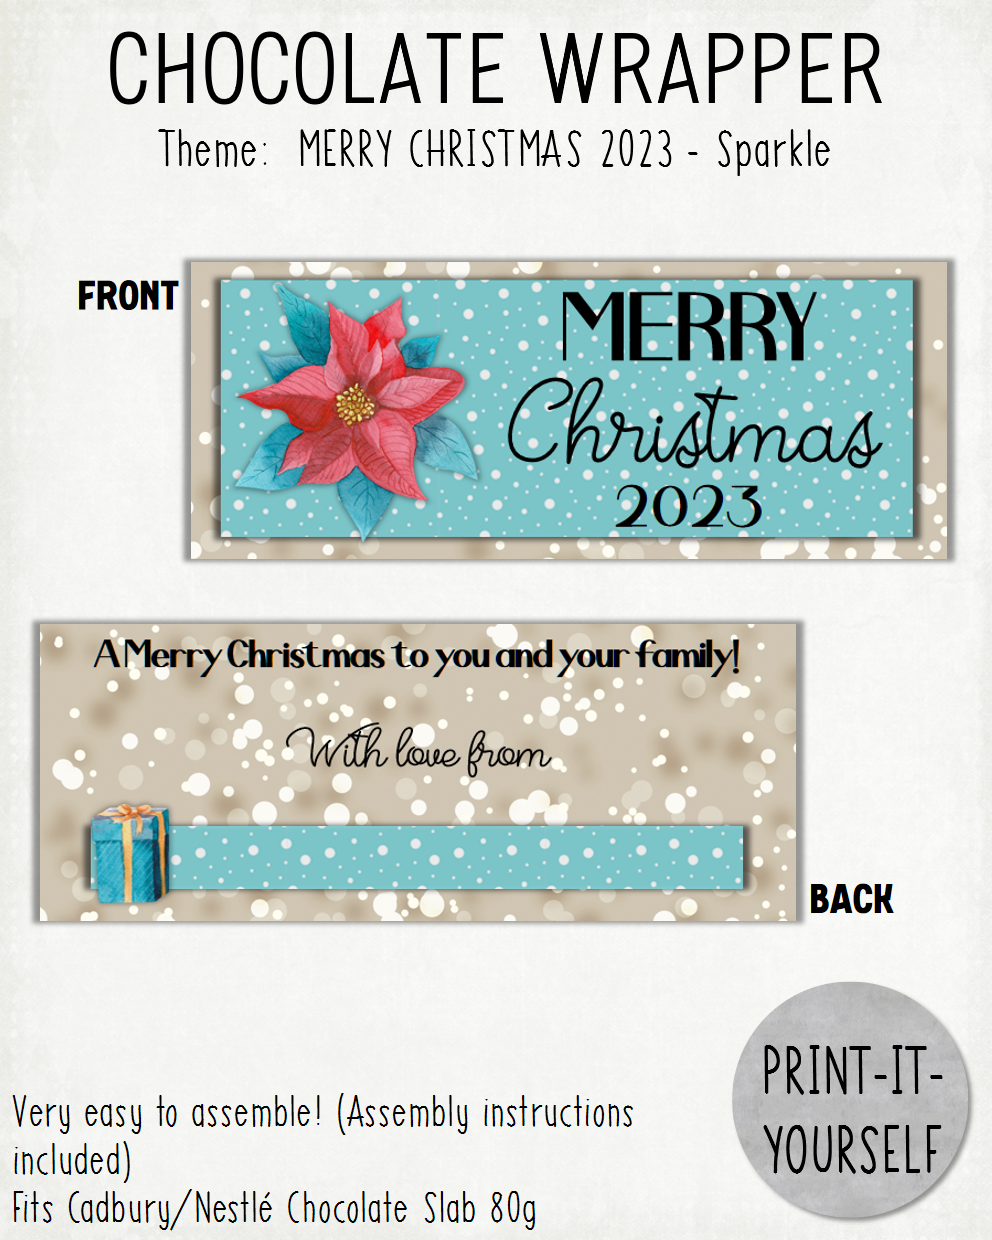 READY TO PRINT:  Merry Christmas 2023 Chocolate Wrapper - Sparkle